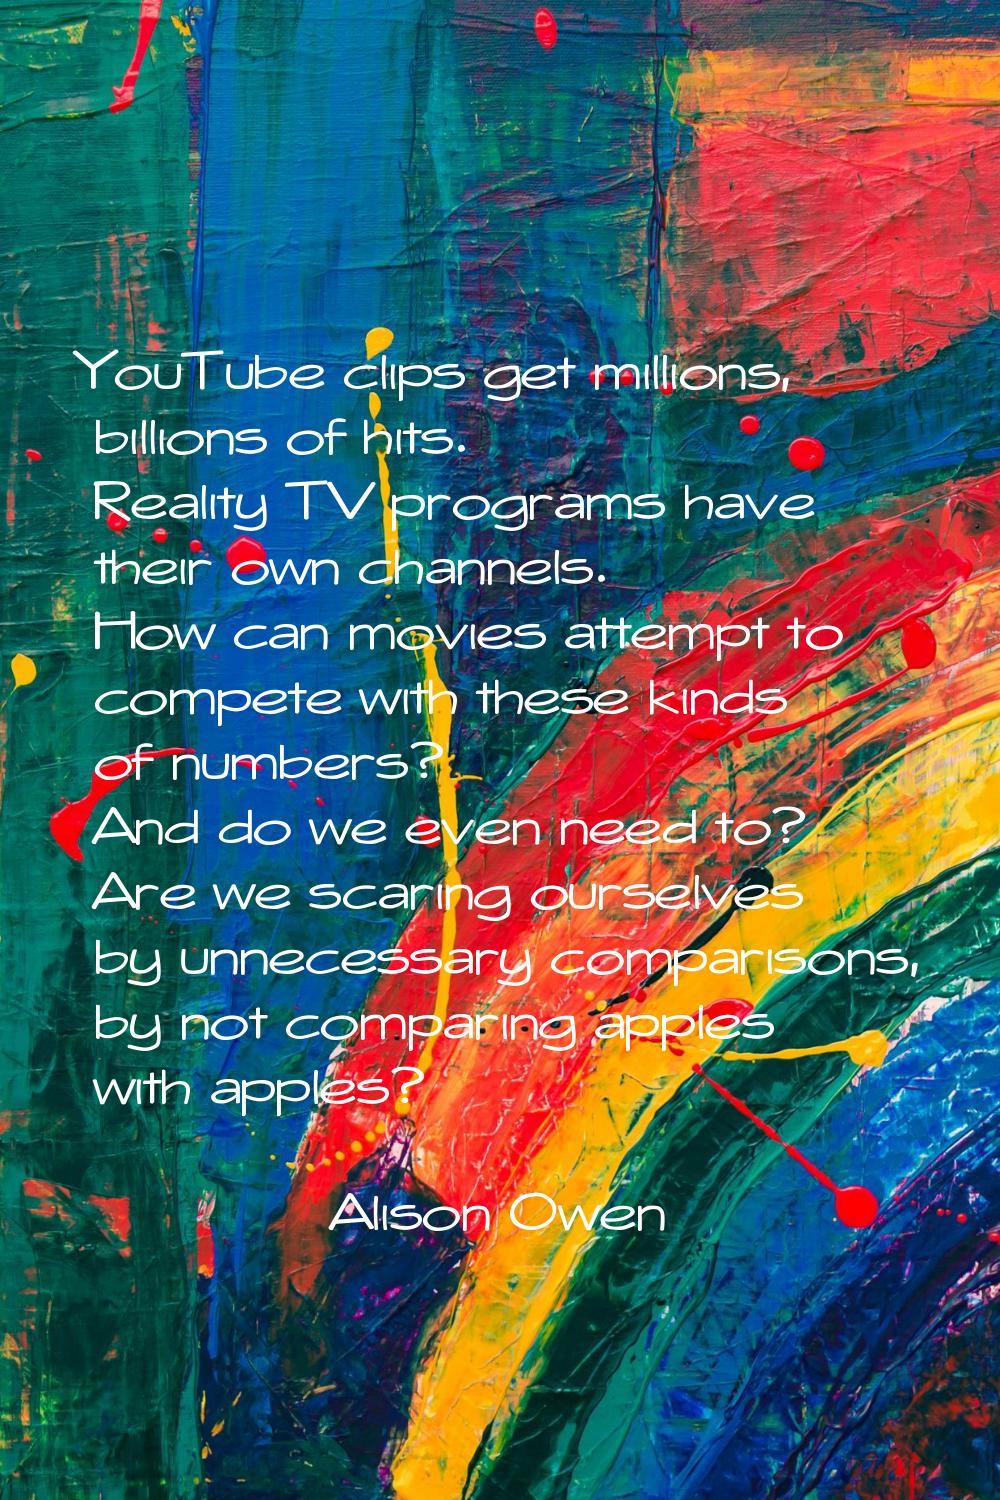 YouTube clips get millions, billions of hits. Reality TV programs have their own channels. How can 